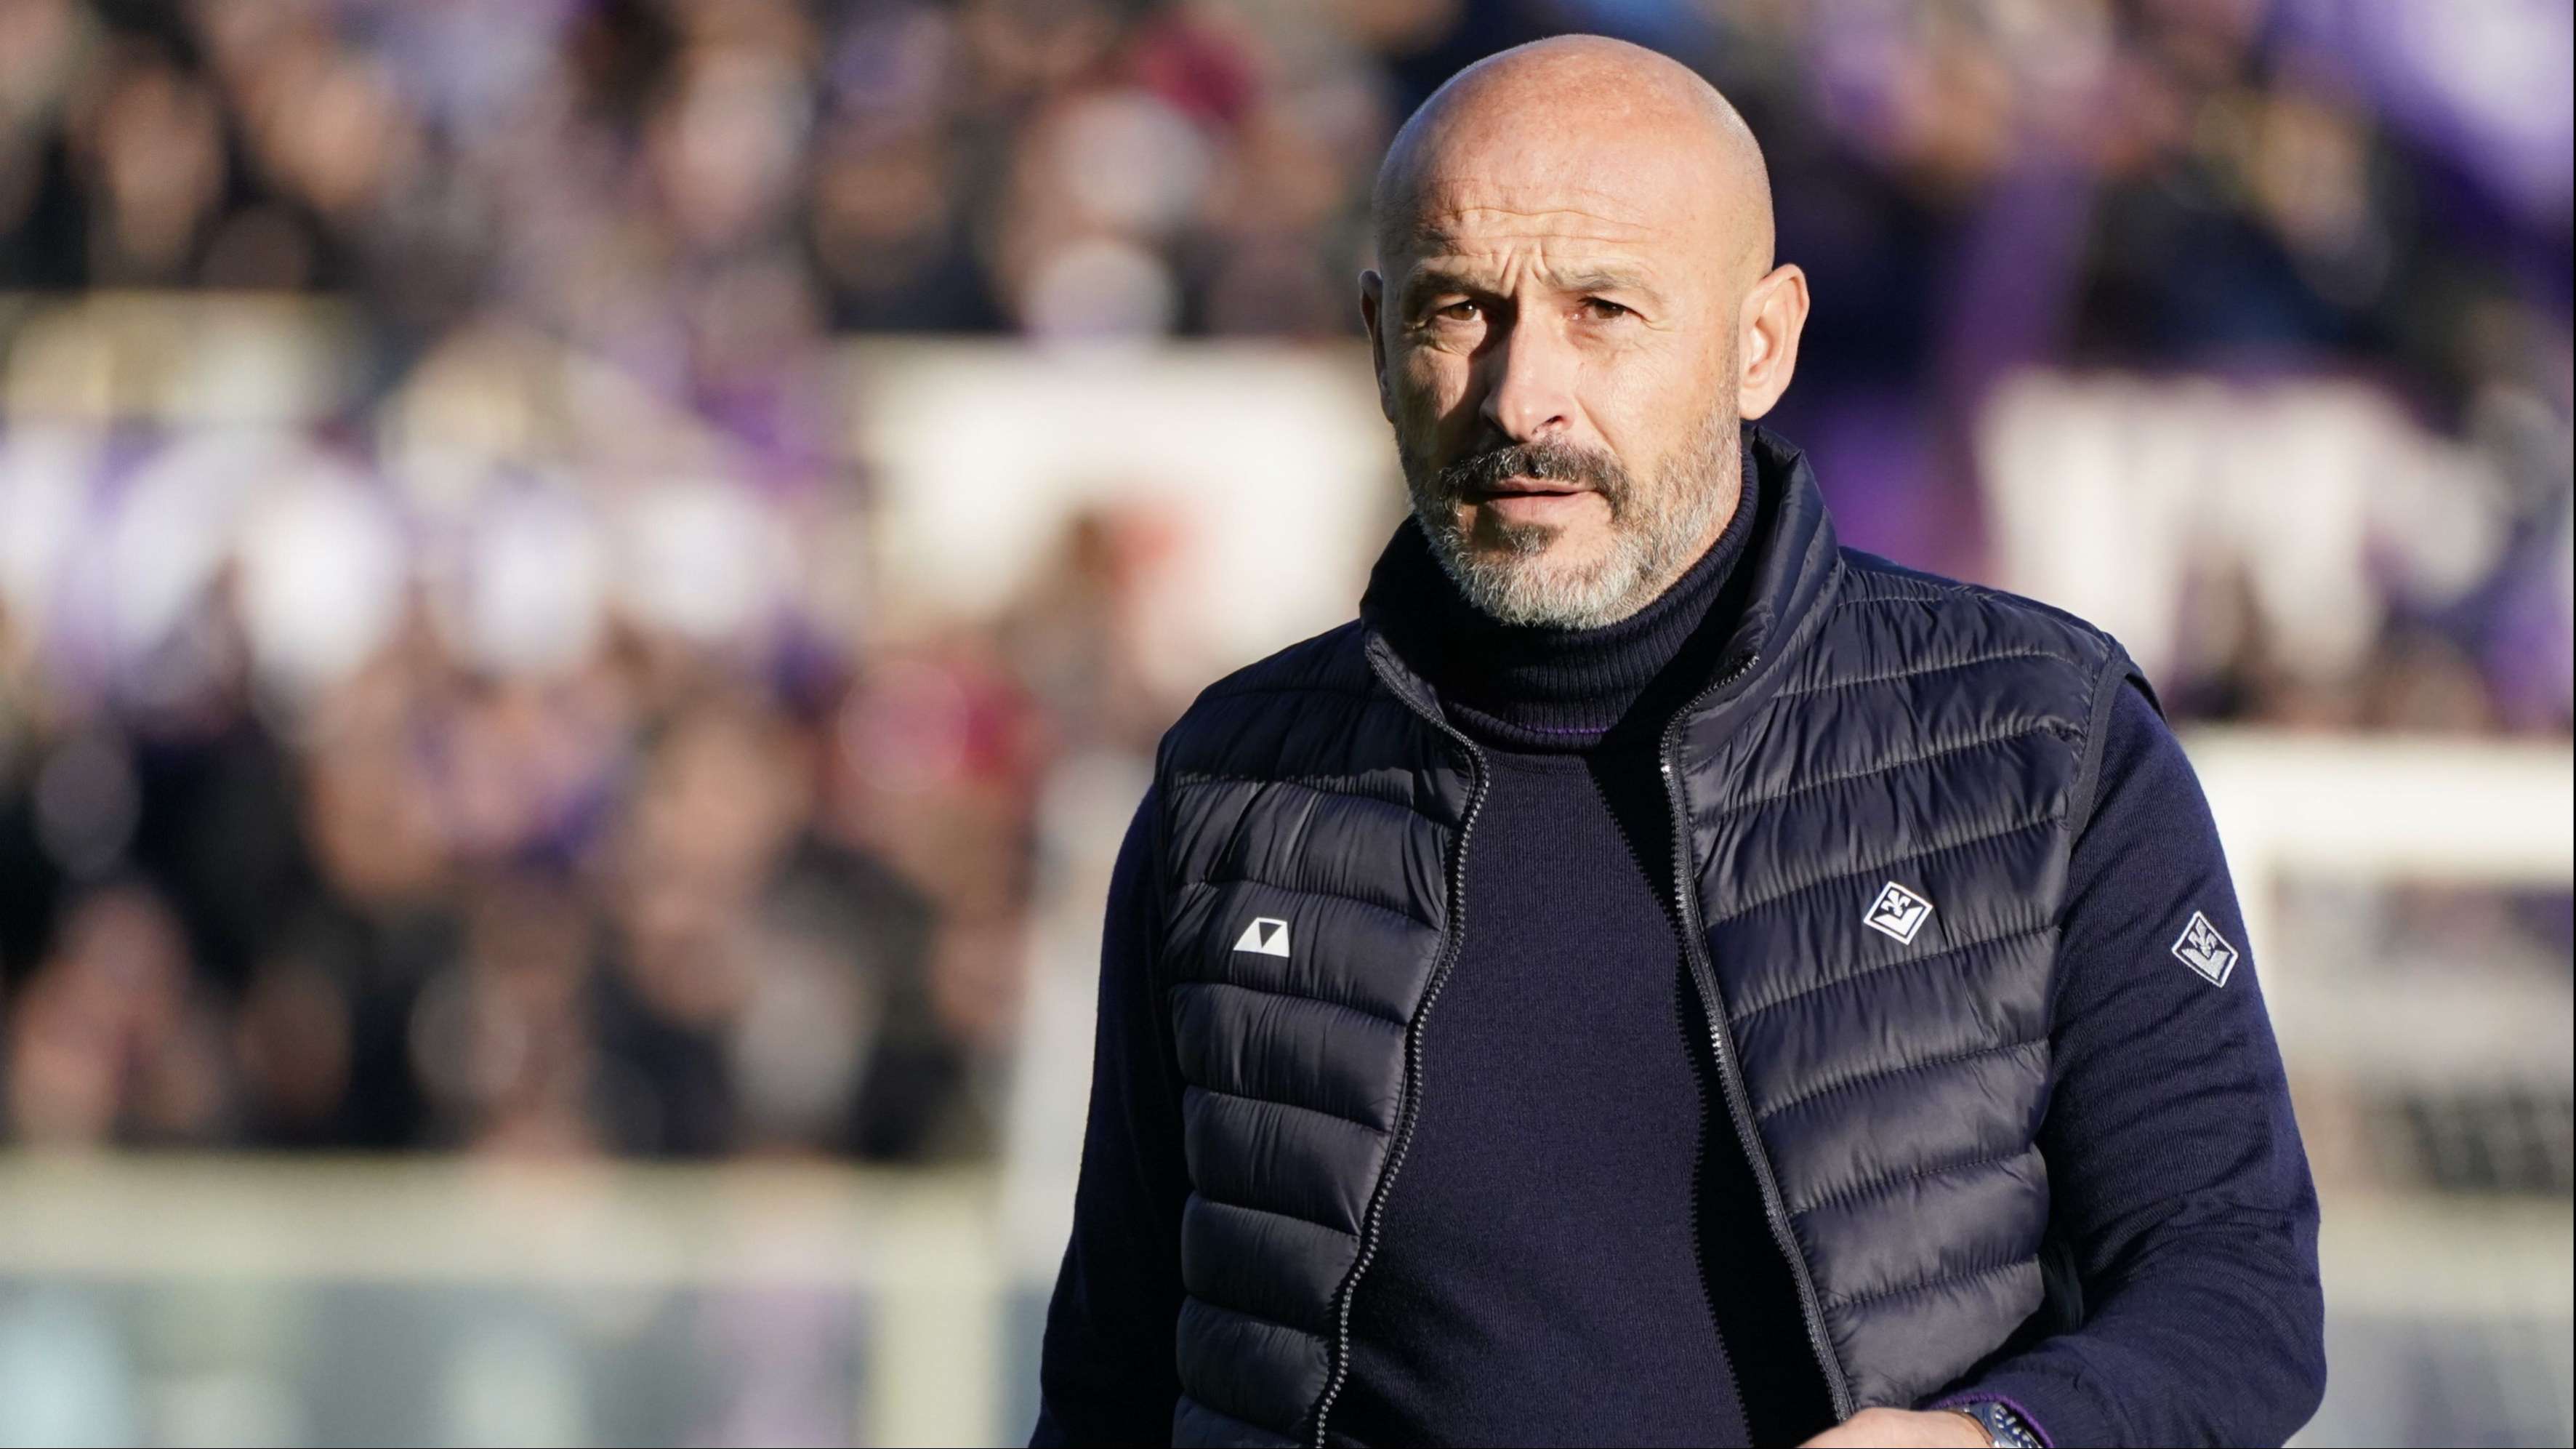 VINCENZO ITALIANO PHILADELPHIA COACH OF THE MONTH FOR DECEMBER | News